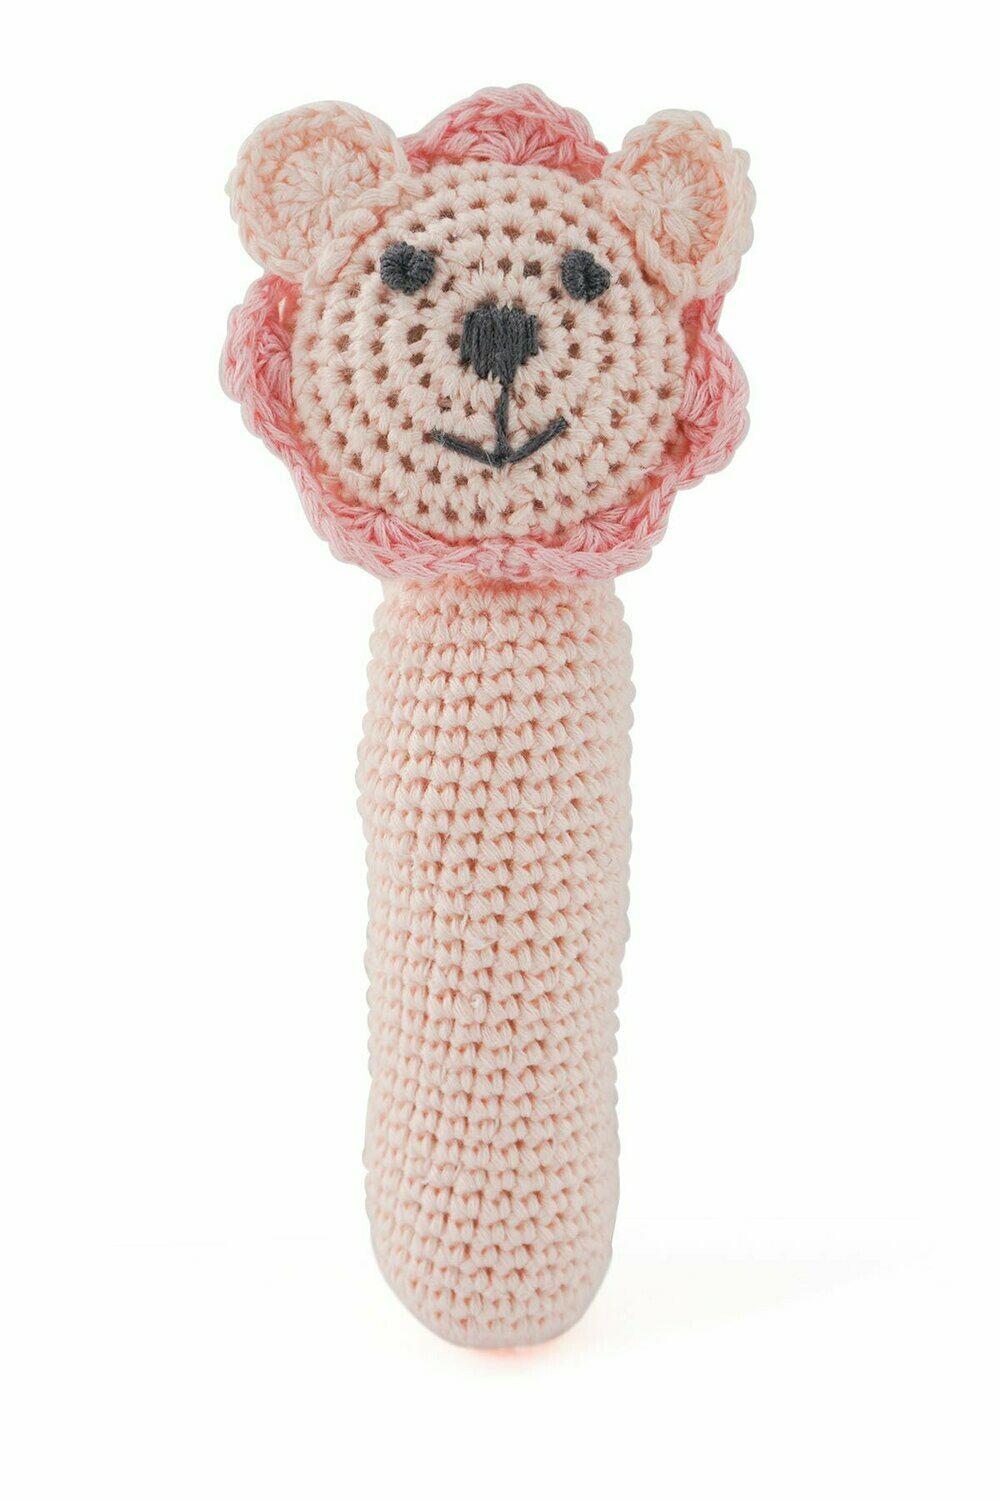 Lion Cotton Crochet Baby Rattle - Pink-Toys-Dlux-The Bay Room